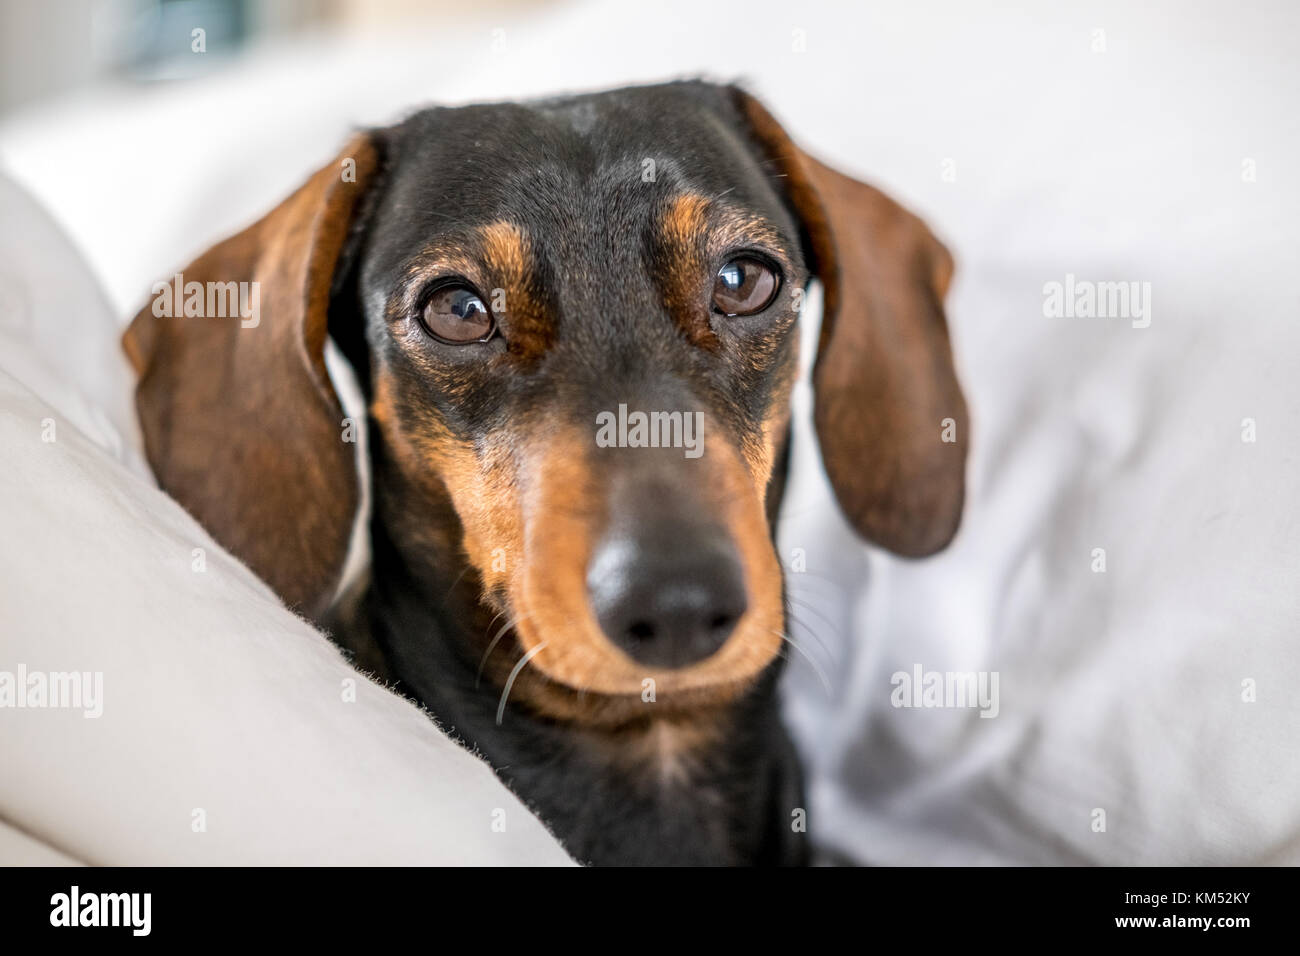 Black and tan miniature dachshund pet dog asleep in bed Stock Photo